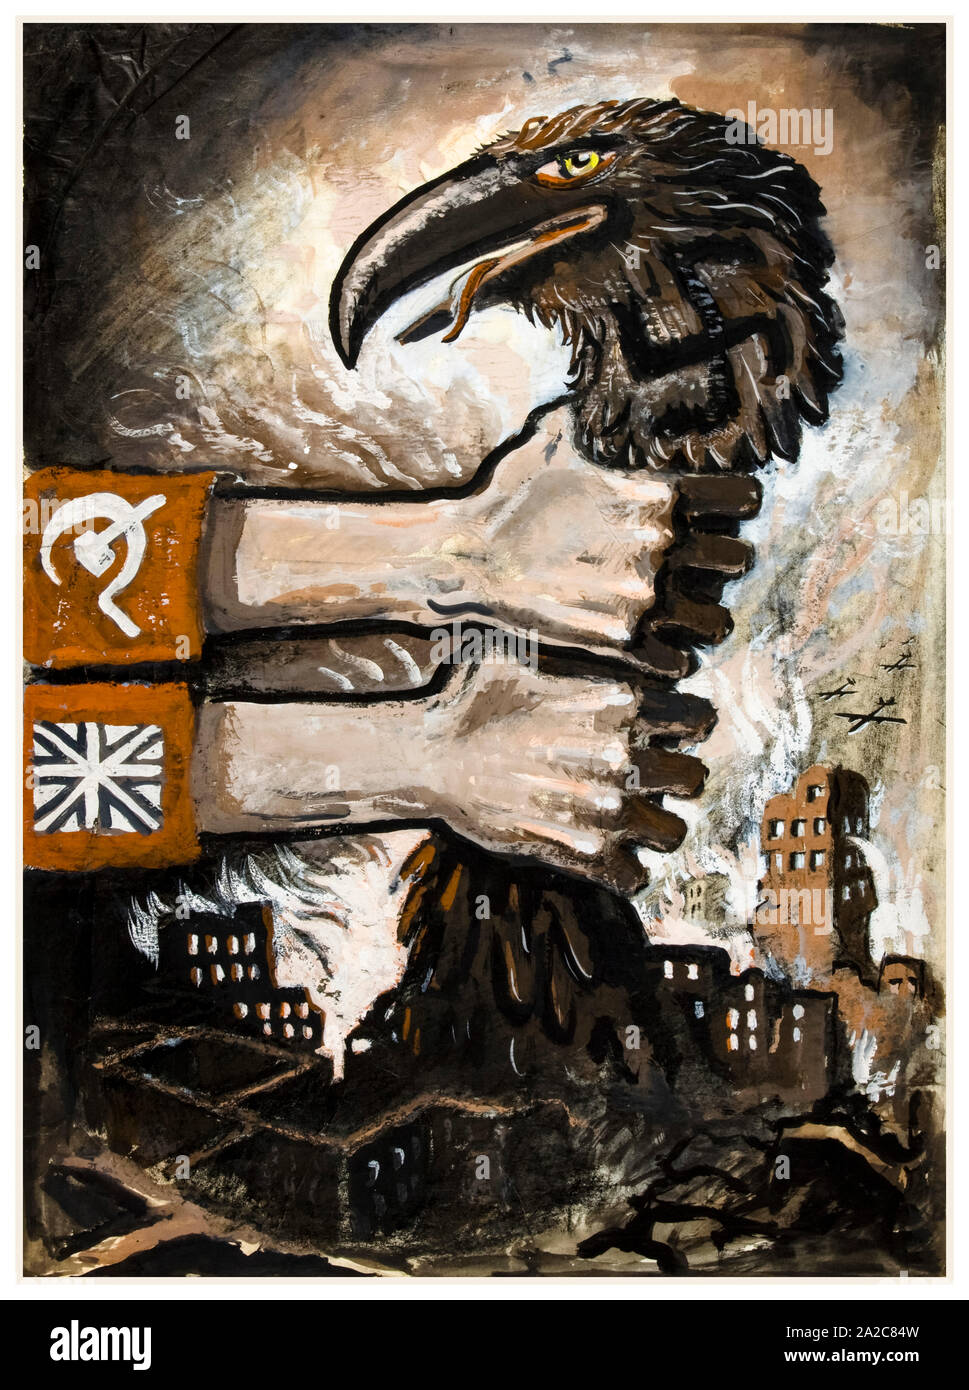 British, WW2, Unity of Strength poster, Inter-allied co-operation, British and Soviet arms grasping neck of predatory Nazi bird arising from the ruins of bombed town, 1939-1946 Stock Photo